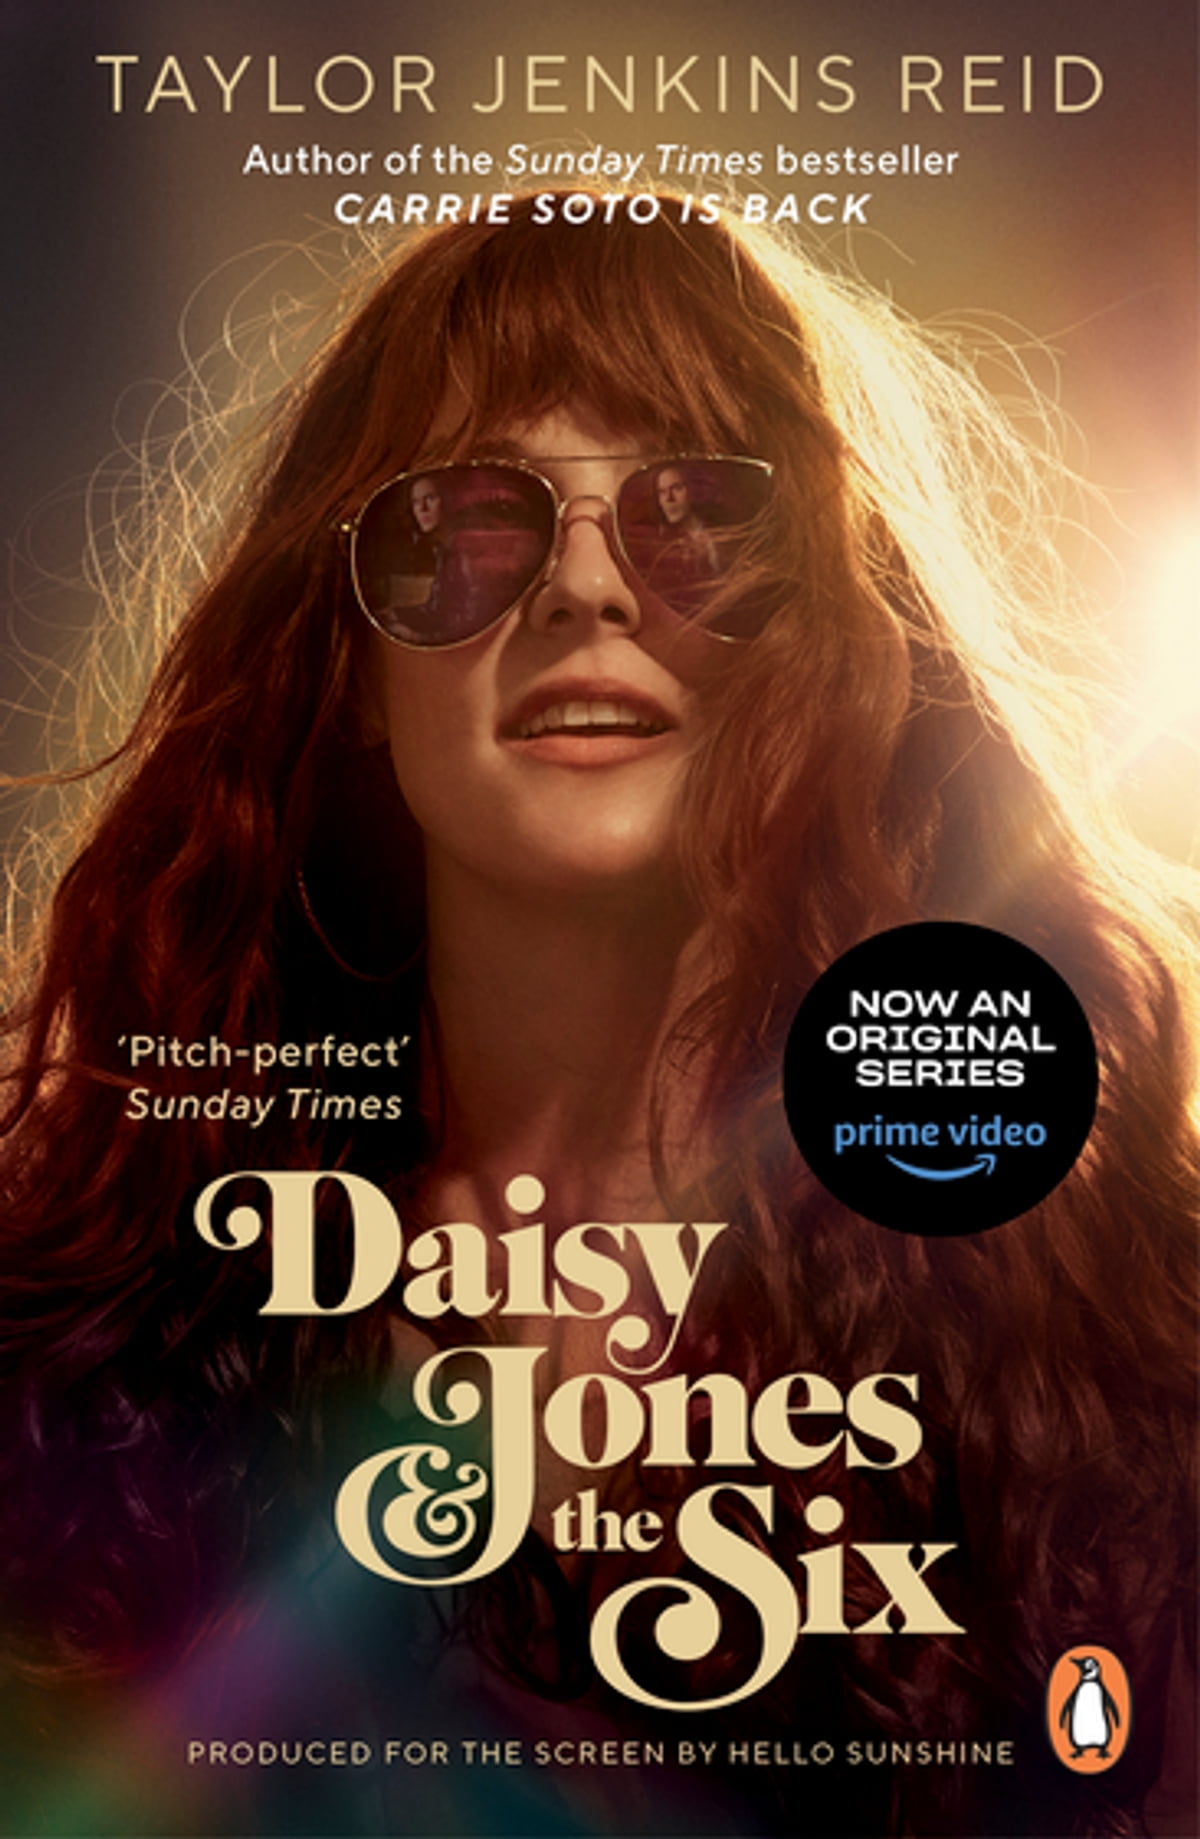 The Daisy Jones book cover, featuring a woman with red hair and sunglasses with a warm spotlight shining behind her.